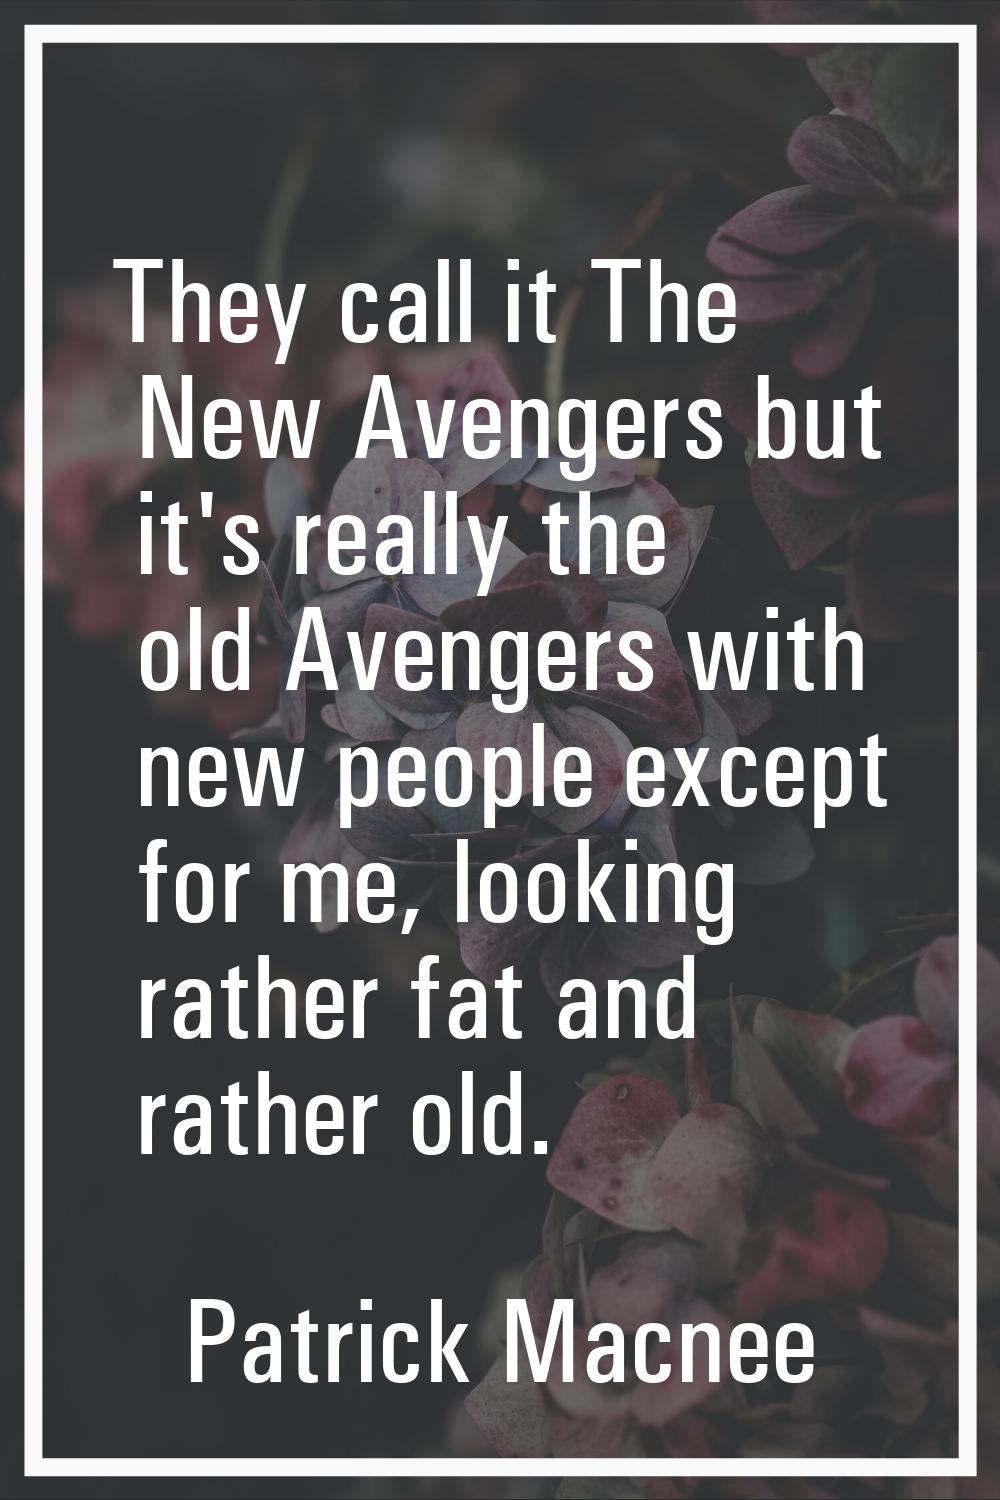 They call it The New Avengers but it's really the old Avengers with new people except for me, looki